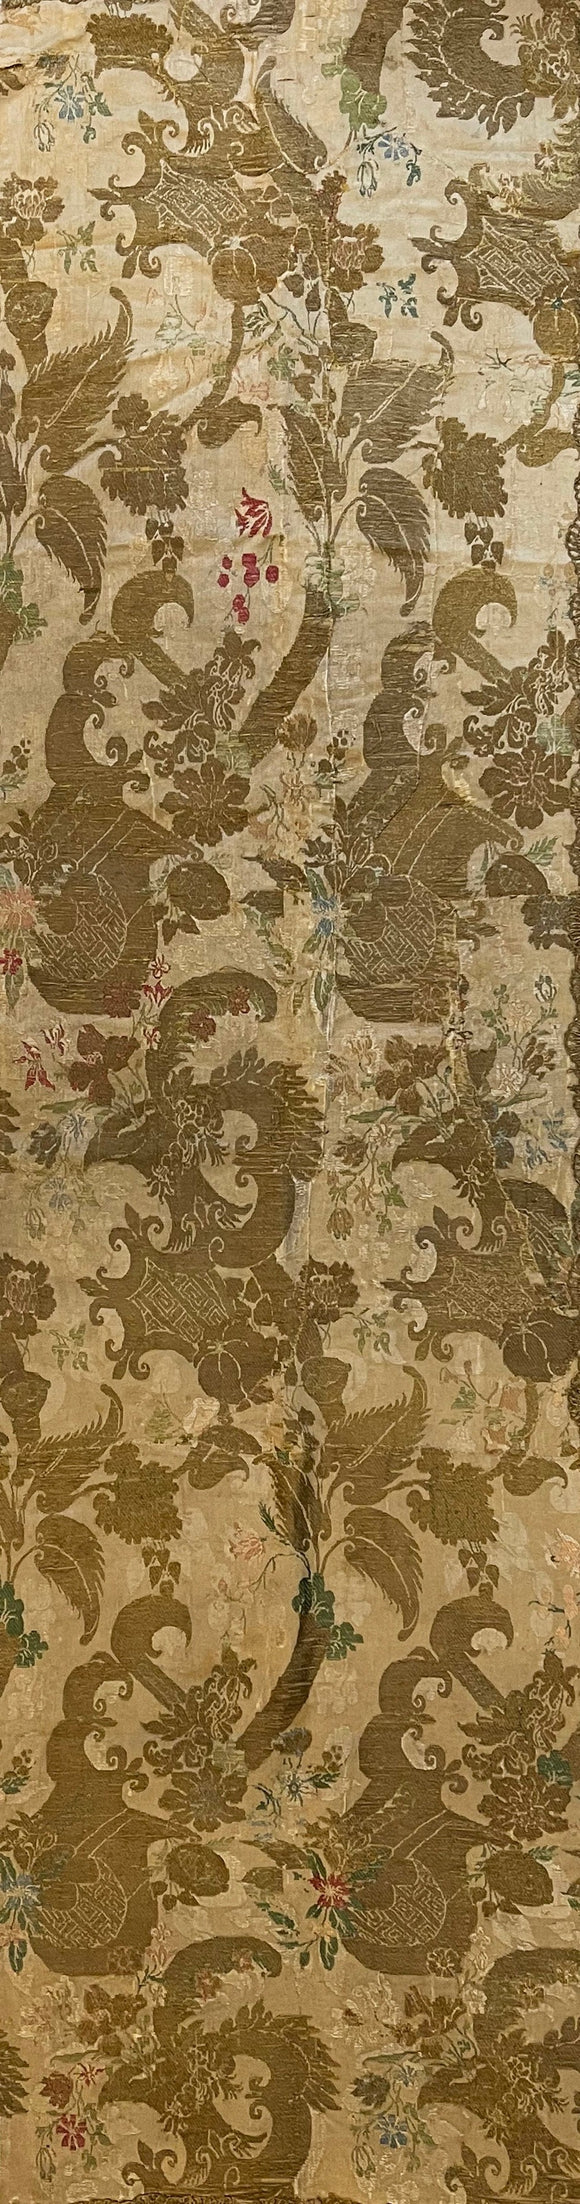 17th Century Large French Metallic Embroidery